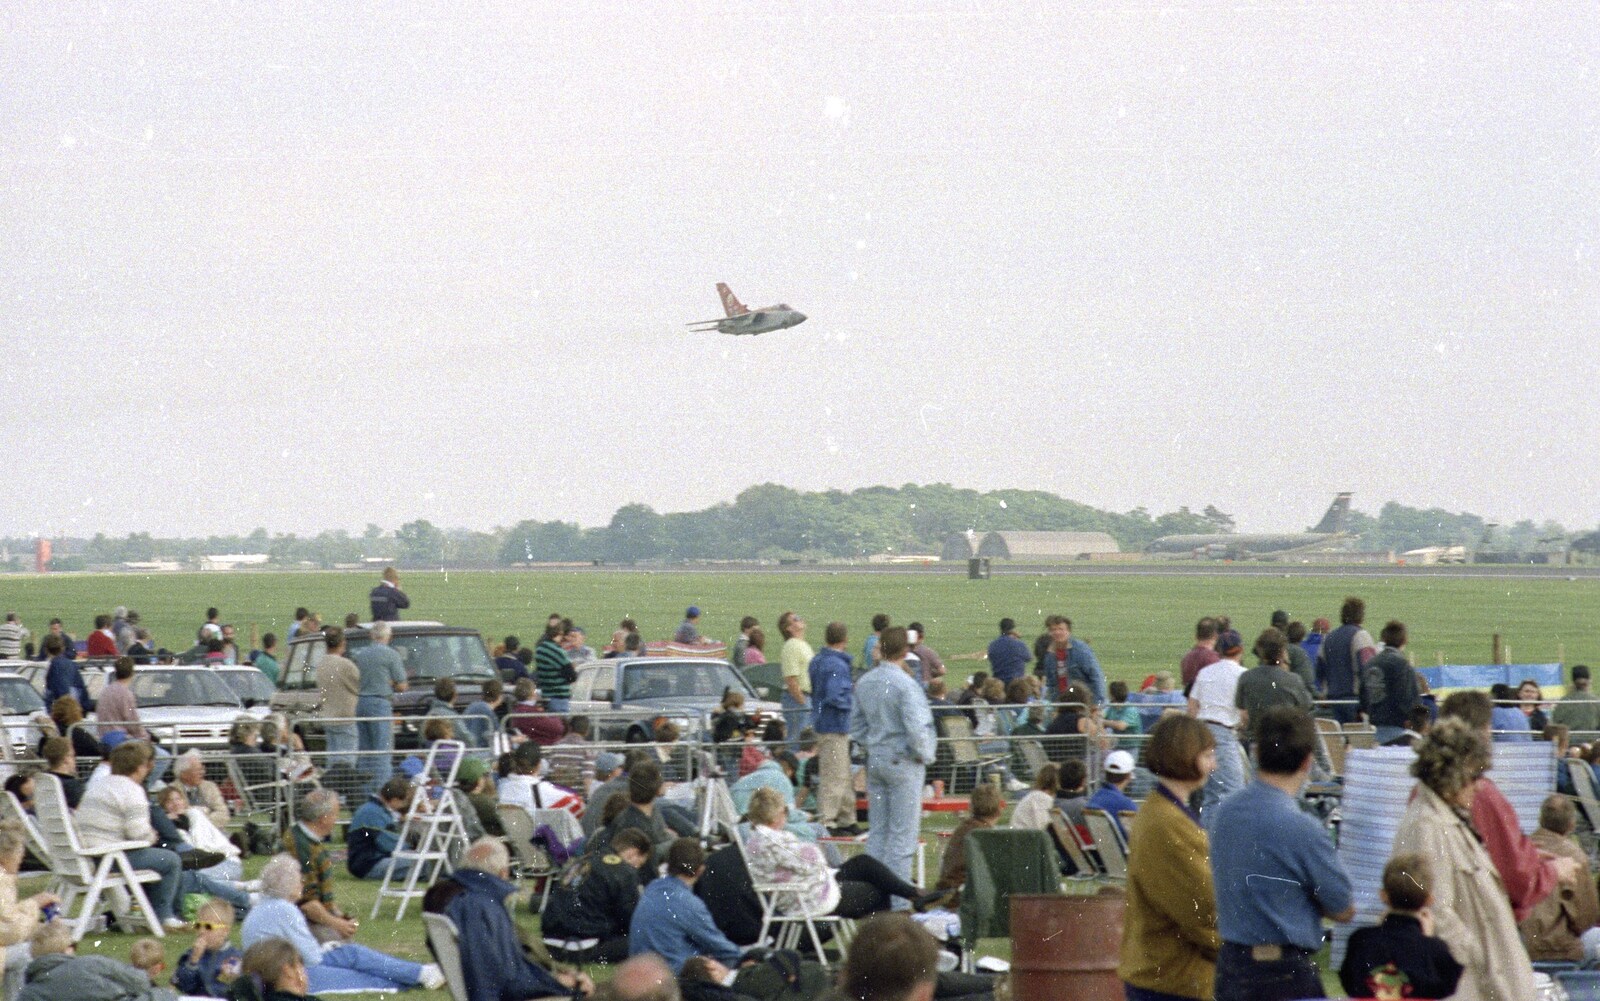 Something small and fast roars over the crowds from The Mildenhall Air Fete, Mildenhall, Suffolk - 29th May 1994